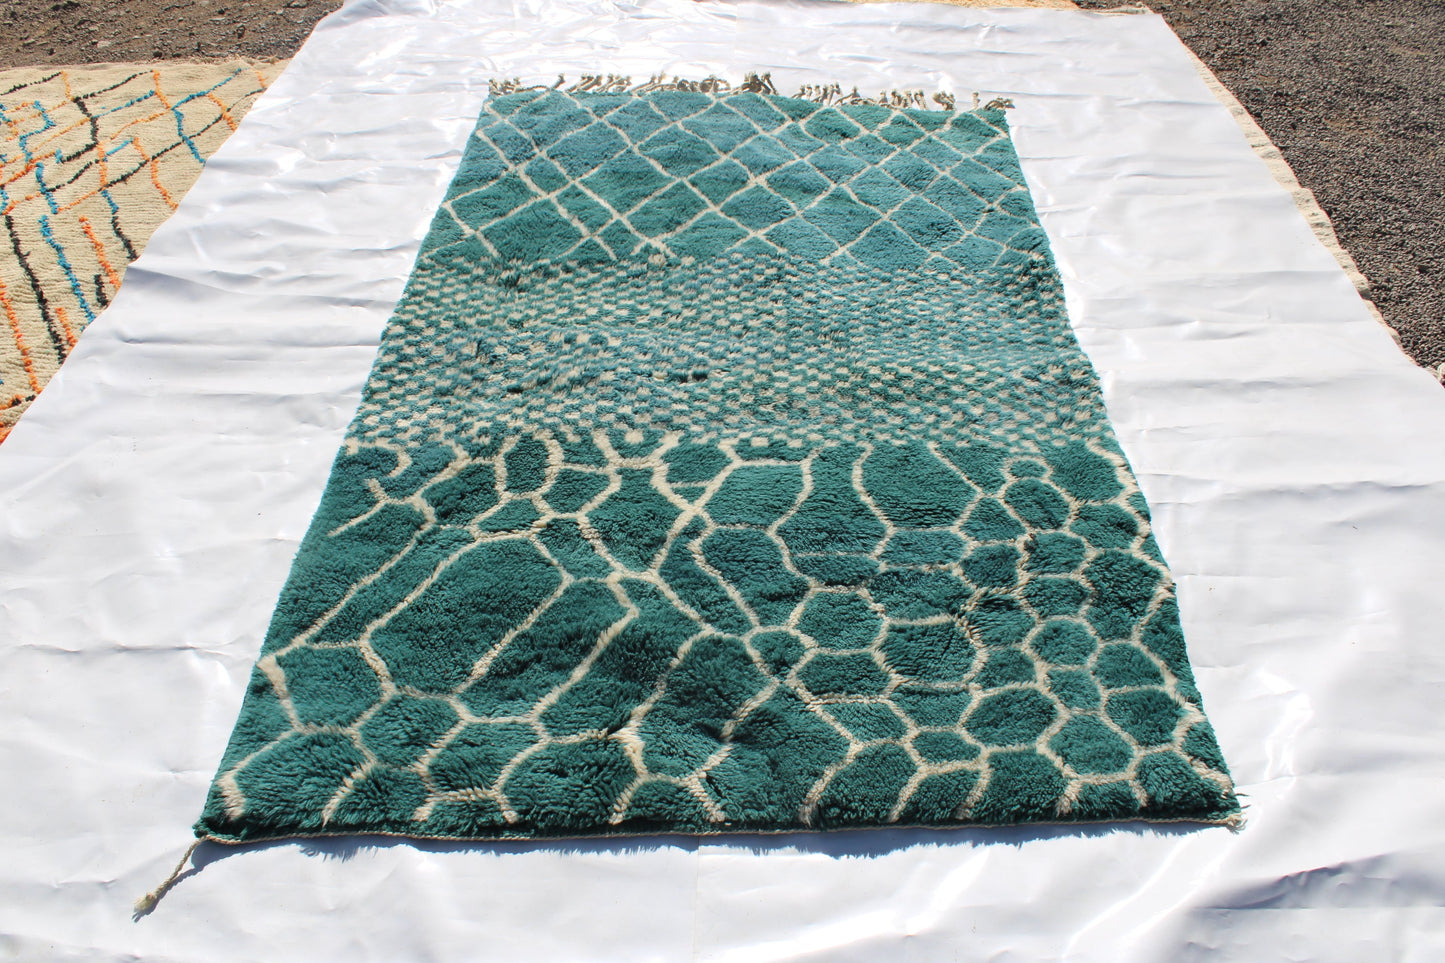 Beni Ourain rugs originate from the Atlas Mountains of Morocco and are characterized by their distinctive, neutral-toned, and geometric designs. These handwoven rugs often feature a plush pile and are made by the Berber tribes,  size is 250x150cm